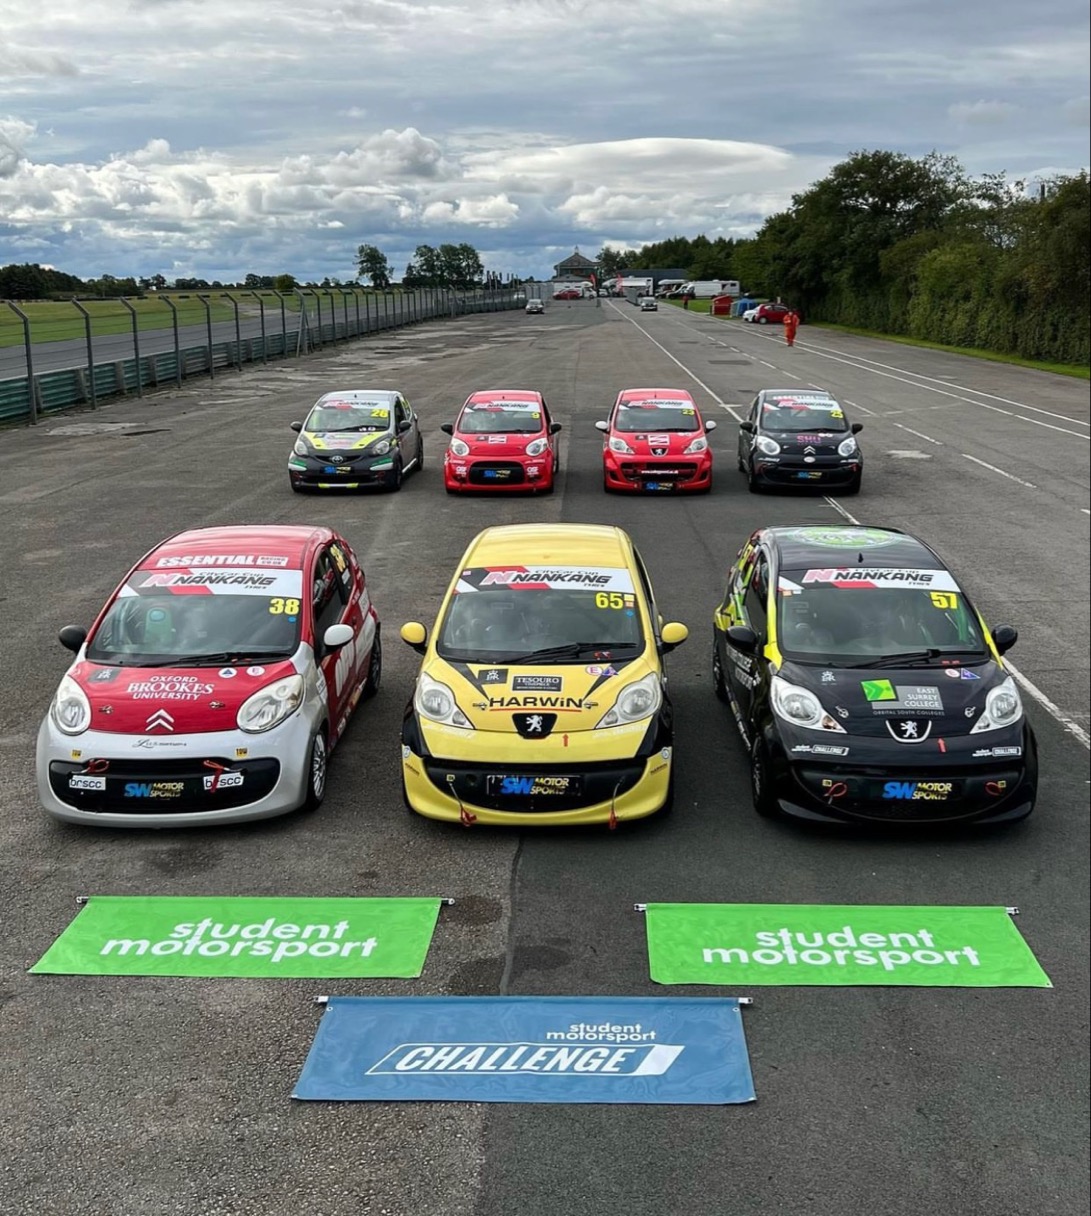 Racing cars lined up posing on track